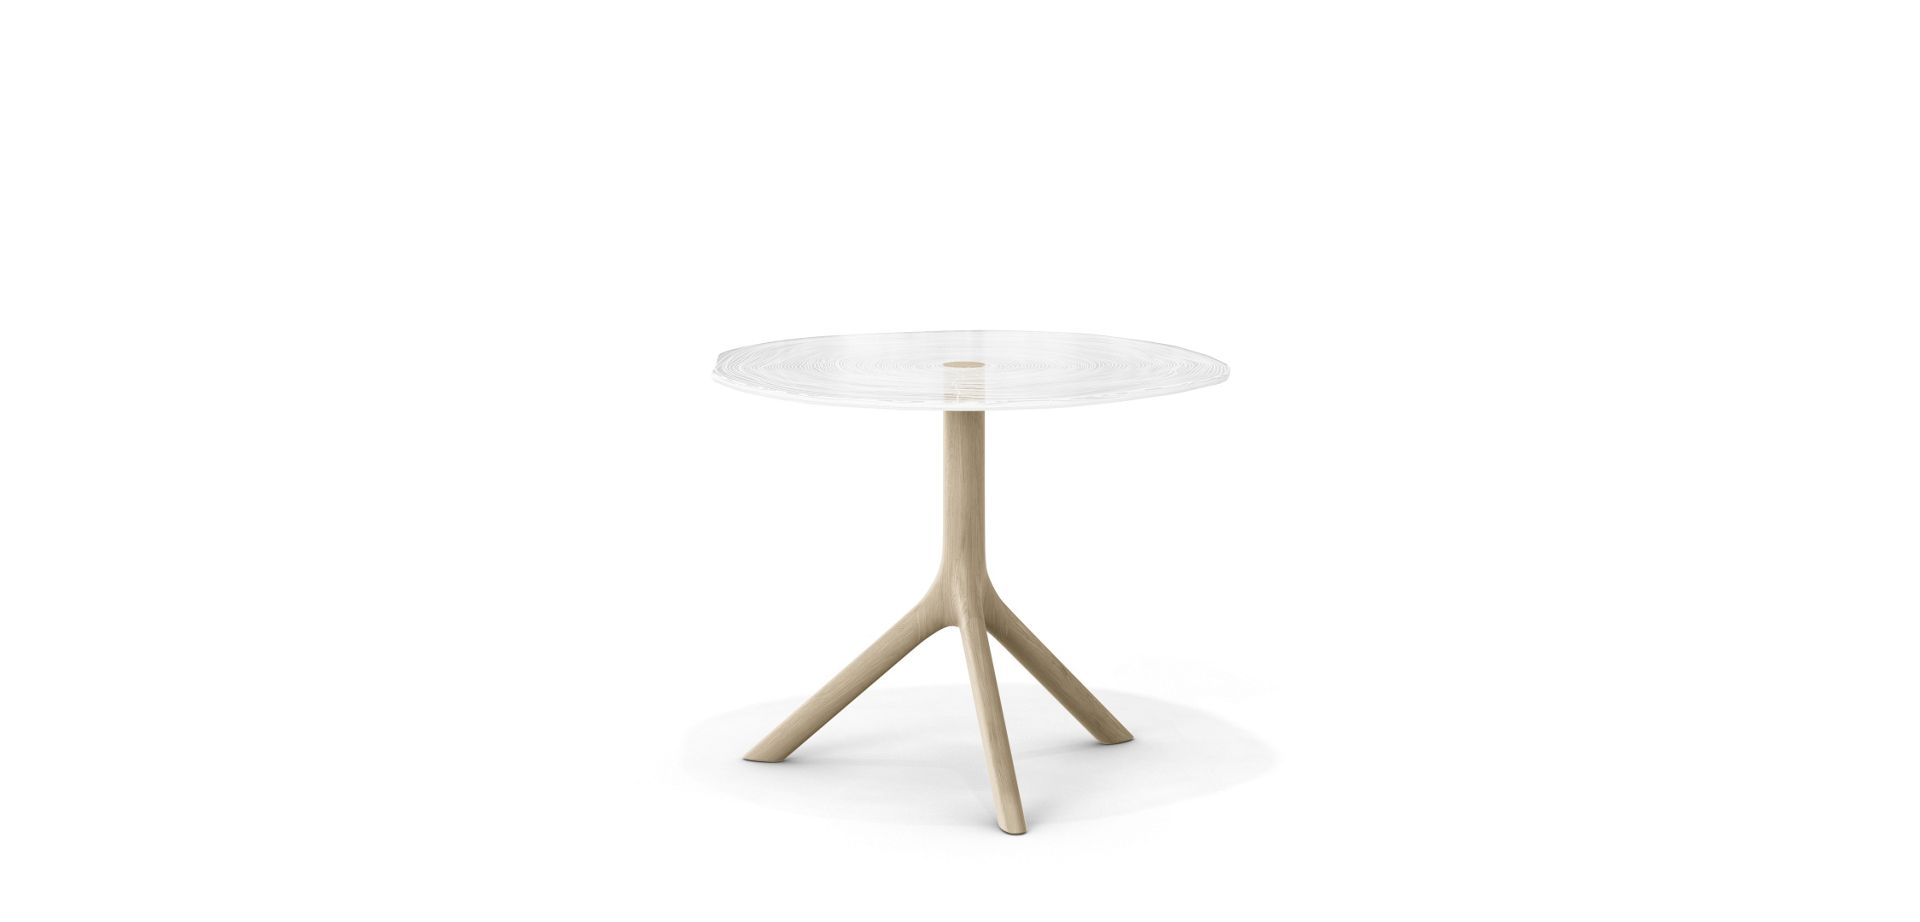 Contemporary Can be ignored Indigenous PLEXIWOOD end table | Roche Bobois